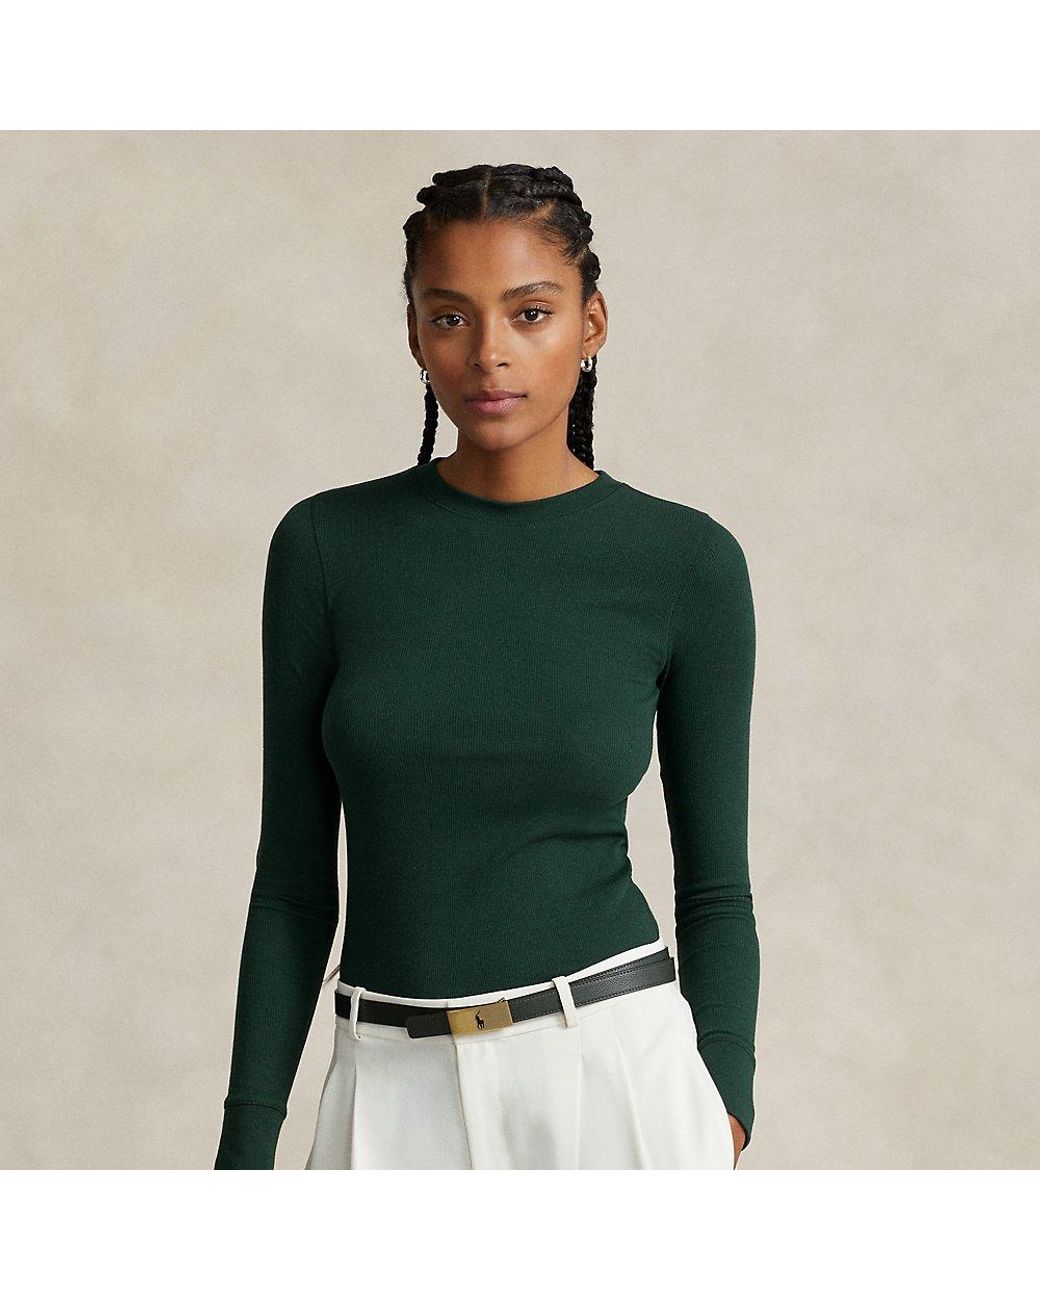 Polo Ralph Lauren Ribbed Suede-trim Long-sleeve Tee in Green | Lyst